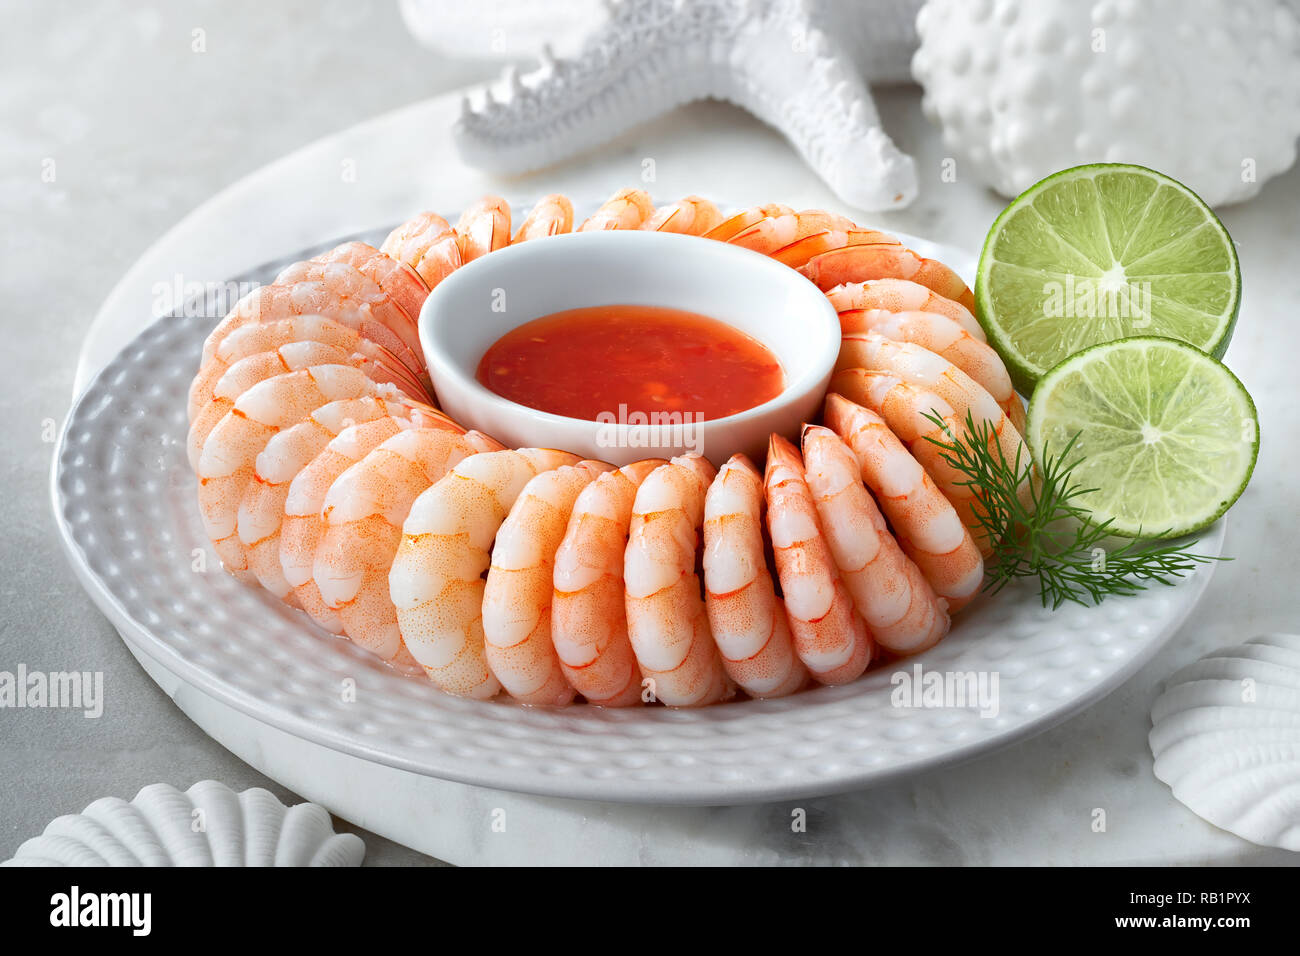 Close-up on shrimp ring with sweet chili sause with dill and lime slices Stock Photo